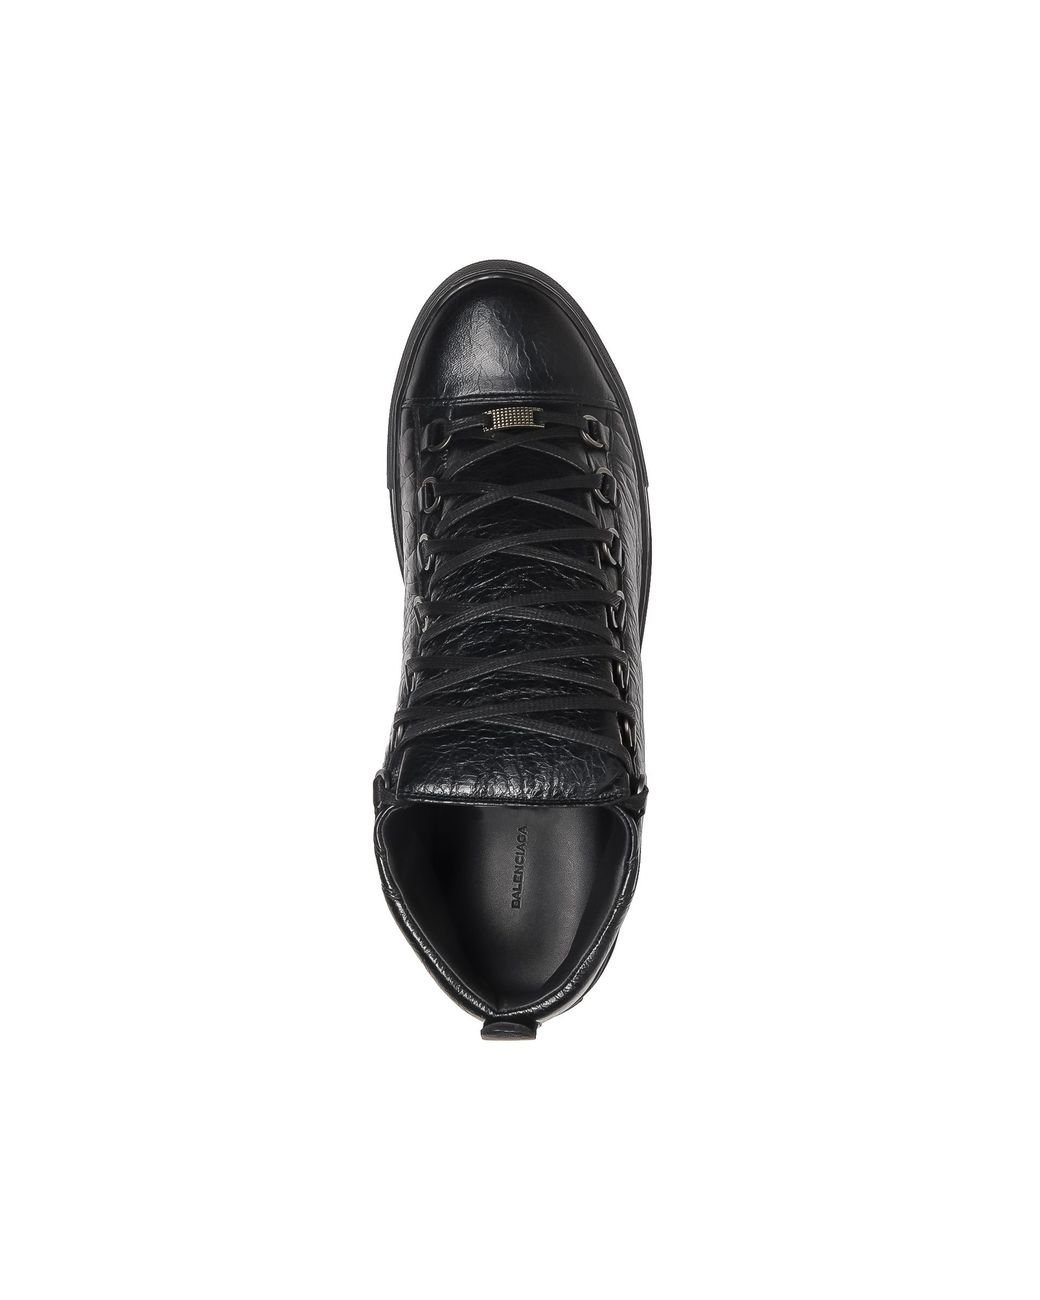 Balenciaga Leather Arena Python High-Top Sneakers in Black for Men | Lyst